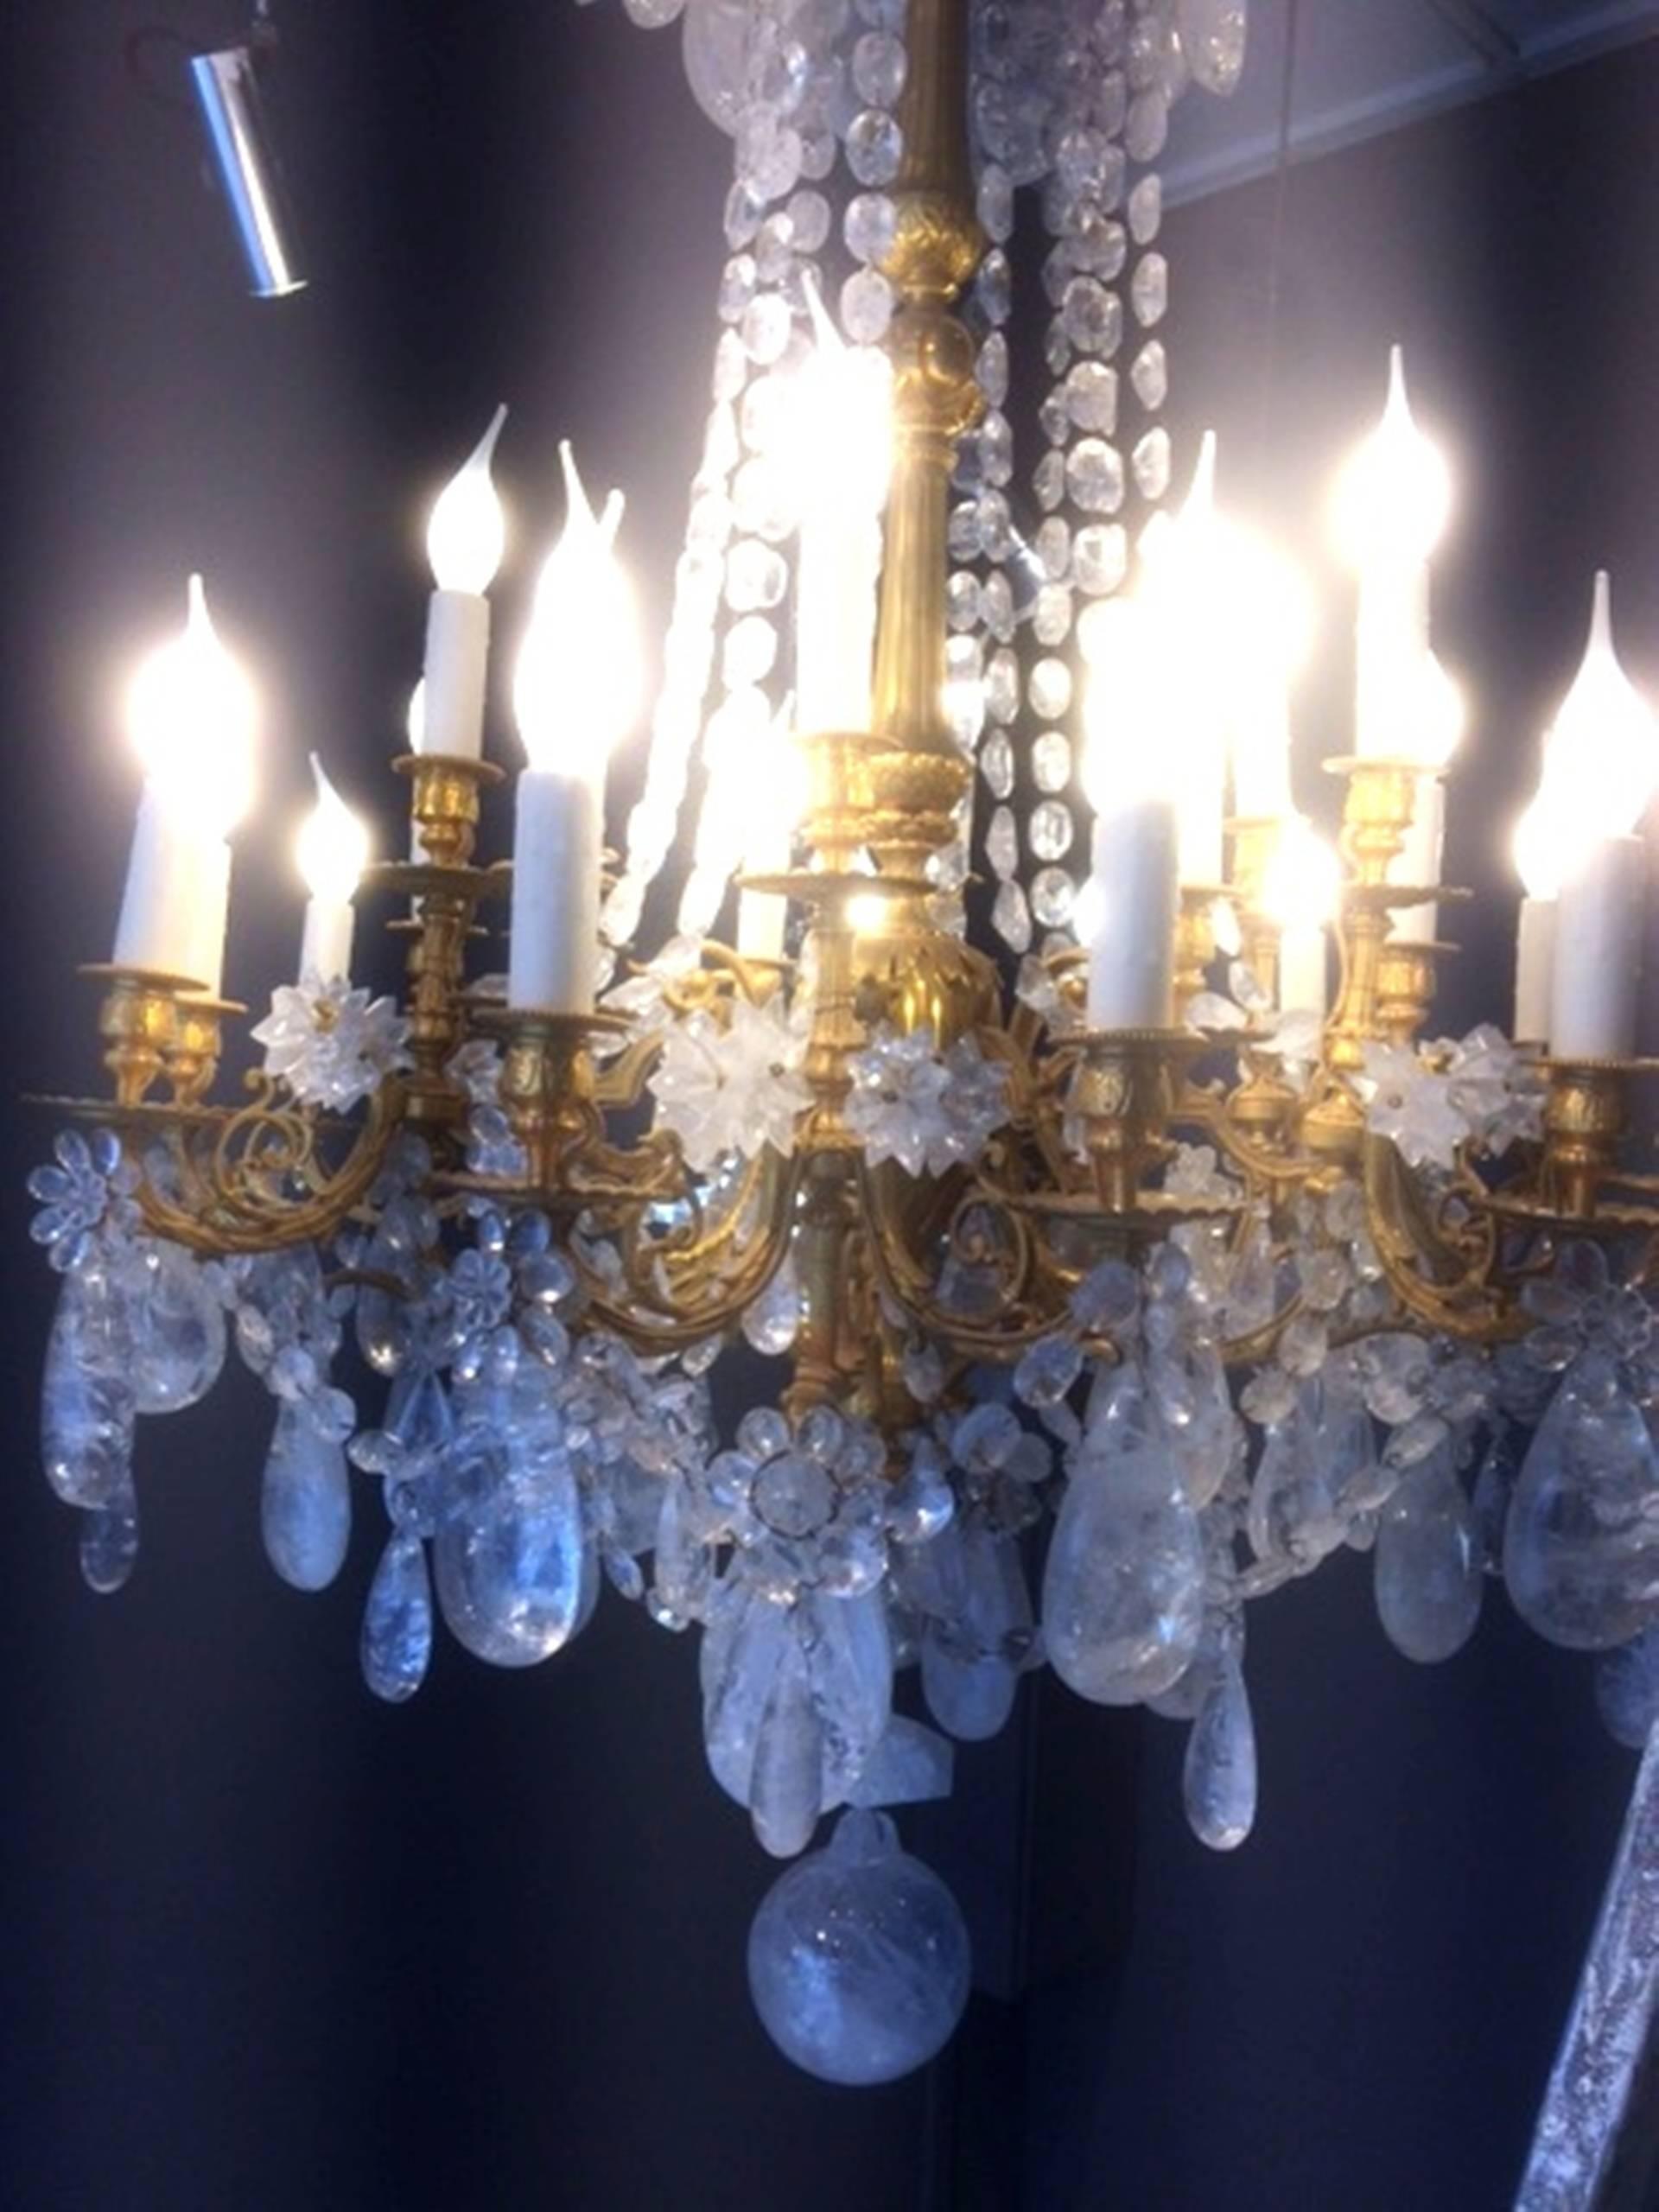 Fabulous rock crystal and chiseled gilt bronze chandelier, Lousi XVI style, 2016
early 20th century structure in gilt bronze with custom carved rock crystal drops and pearls.
24 lights
Absolutely spectacular
One of a kind.